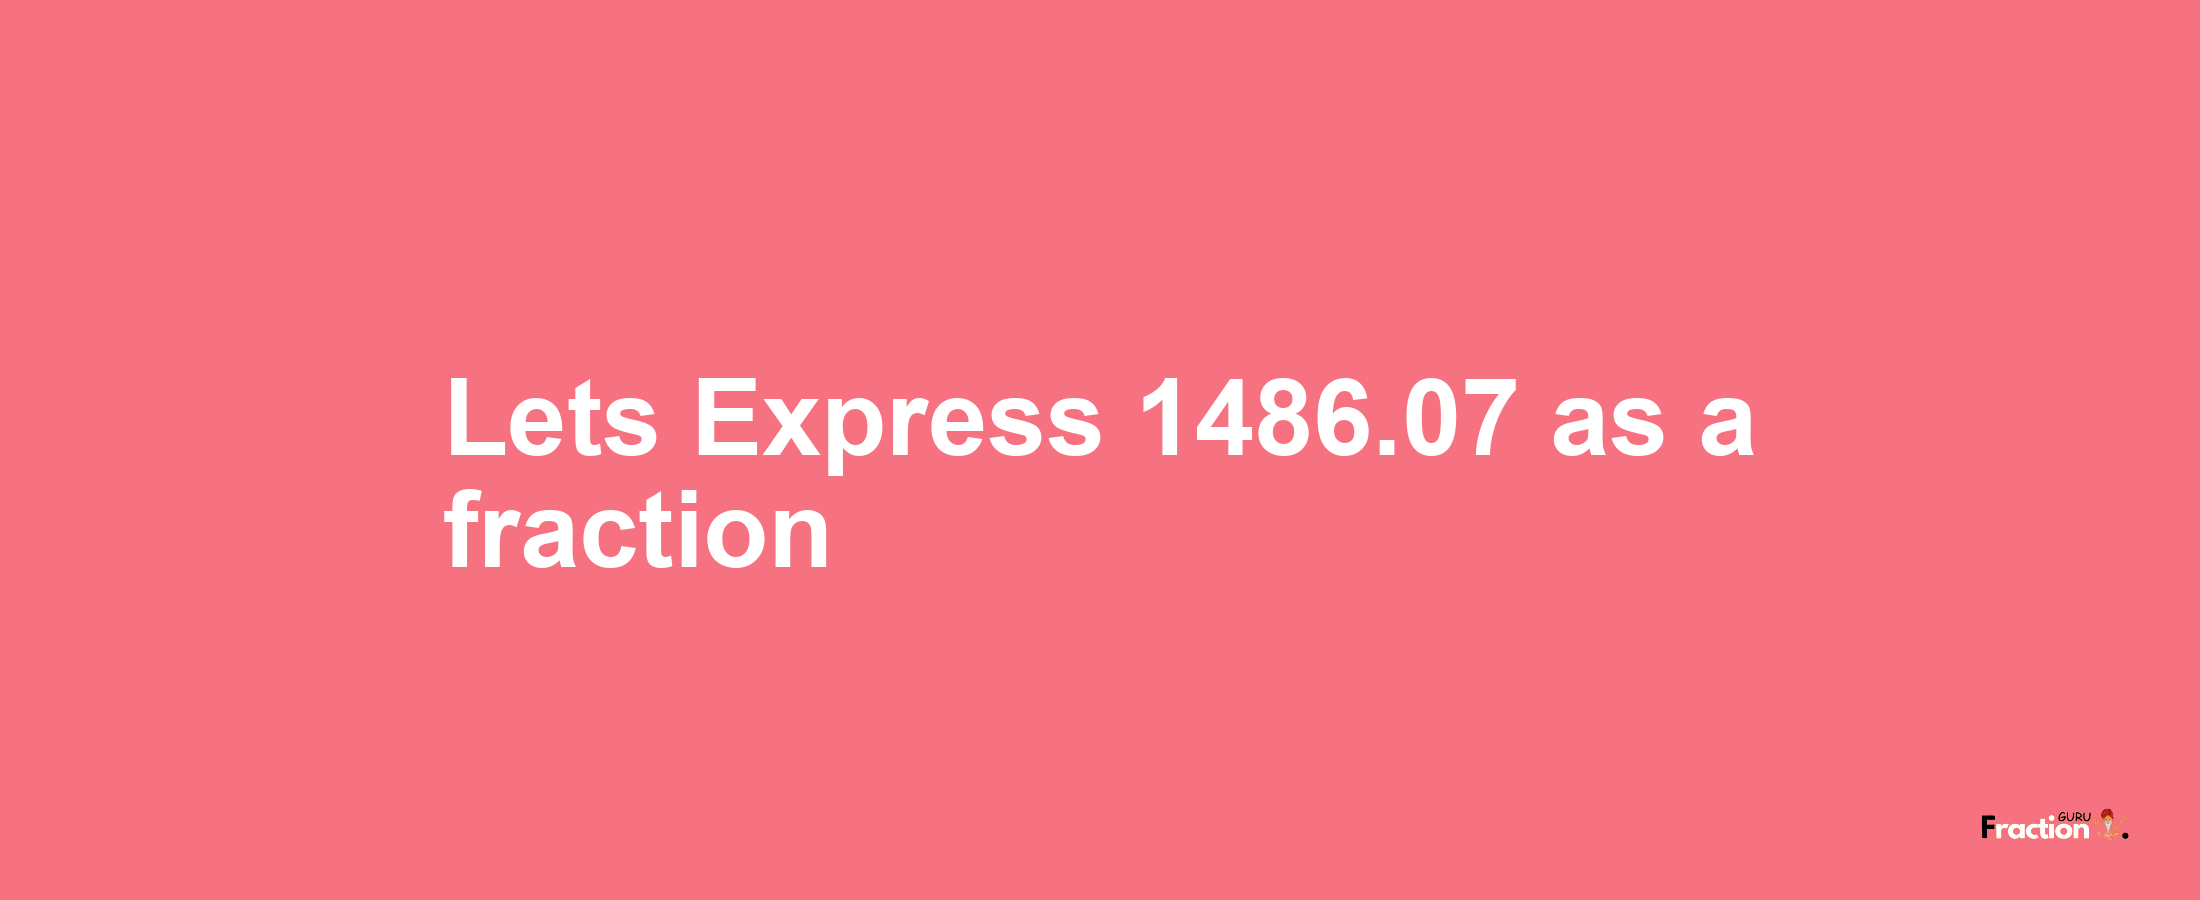 Lets Express 1486.07 as afraction